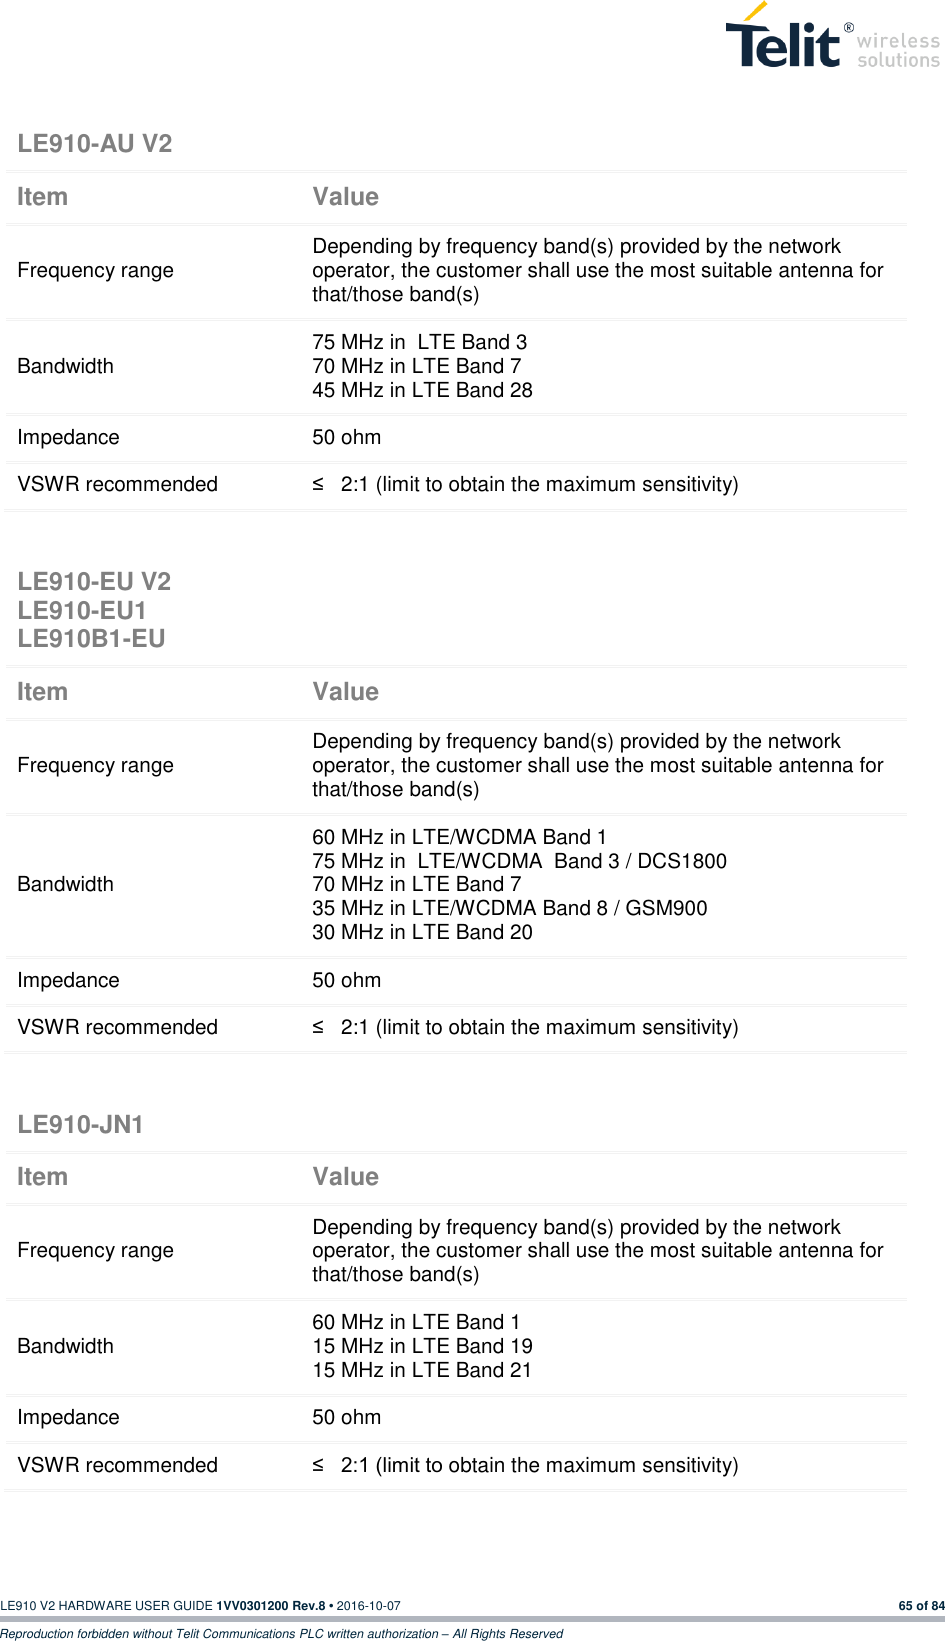   LE910 V2 HARDWARE USER GUIDE 1VV0301200 Rev.8 • 2016-10-07 65 of 84 Reproduction forbidden without Telit Communications PLC written authorization – All Rights Reserved      LE910-AU V2  Item Value Frequency range Depending by frequency band(s) provided by the network operator, the customer shall use the most suitable antenna for that/those band(s) Bandwidth 75 MHz in  LTE Band 3 70 MHz in LTE Band 7 45 MHz in LTE Band 28 Impedance 50 ohm VSWR recommended ≤   2:1 (limit to obtain the maximum sensitivity) LE910-EU V2 LE910-EU1 LE910B1-EU  Item Value Frequency range Depending by frequency band(s) provided by the network operator, the customer shall use the most suitable antenna for that/those band(s) Bandwidth 60 MHz in LTE/WCDMA Band 1 75 MHz in  LTE/WCDMA  Band 3 / DCS1800 70 MHz in LTE Band 7 35 MHz in LTE/WCDMA Band 8 / GSM900 30 MHz in LTE Band 20 Impedance 50 ohm VSWR recommended ≤   2:1 (limit to obtain the maximum sensitivity) LE910-JN1  Item Value Frequency range Depending by frequency band(s) provided by the network operator, the customer shall use the most suitable antenna for that/those band(s) Bandwidth 60 MHz in LTE Band 1 15 MHz in LTE Band 19 15 MHz in LTE Band 21 Impedance 50 ohm VSWR recommended ≤   2:1 (limit to obtain the maximum sensitivity) 